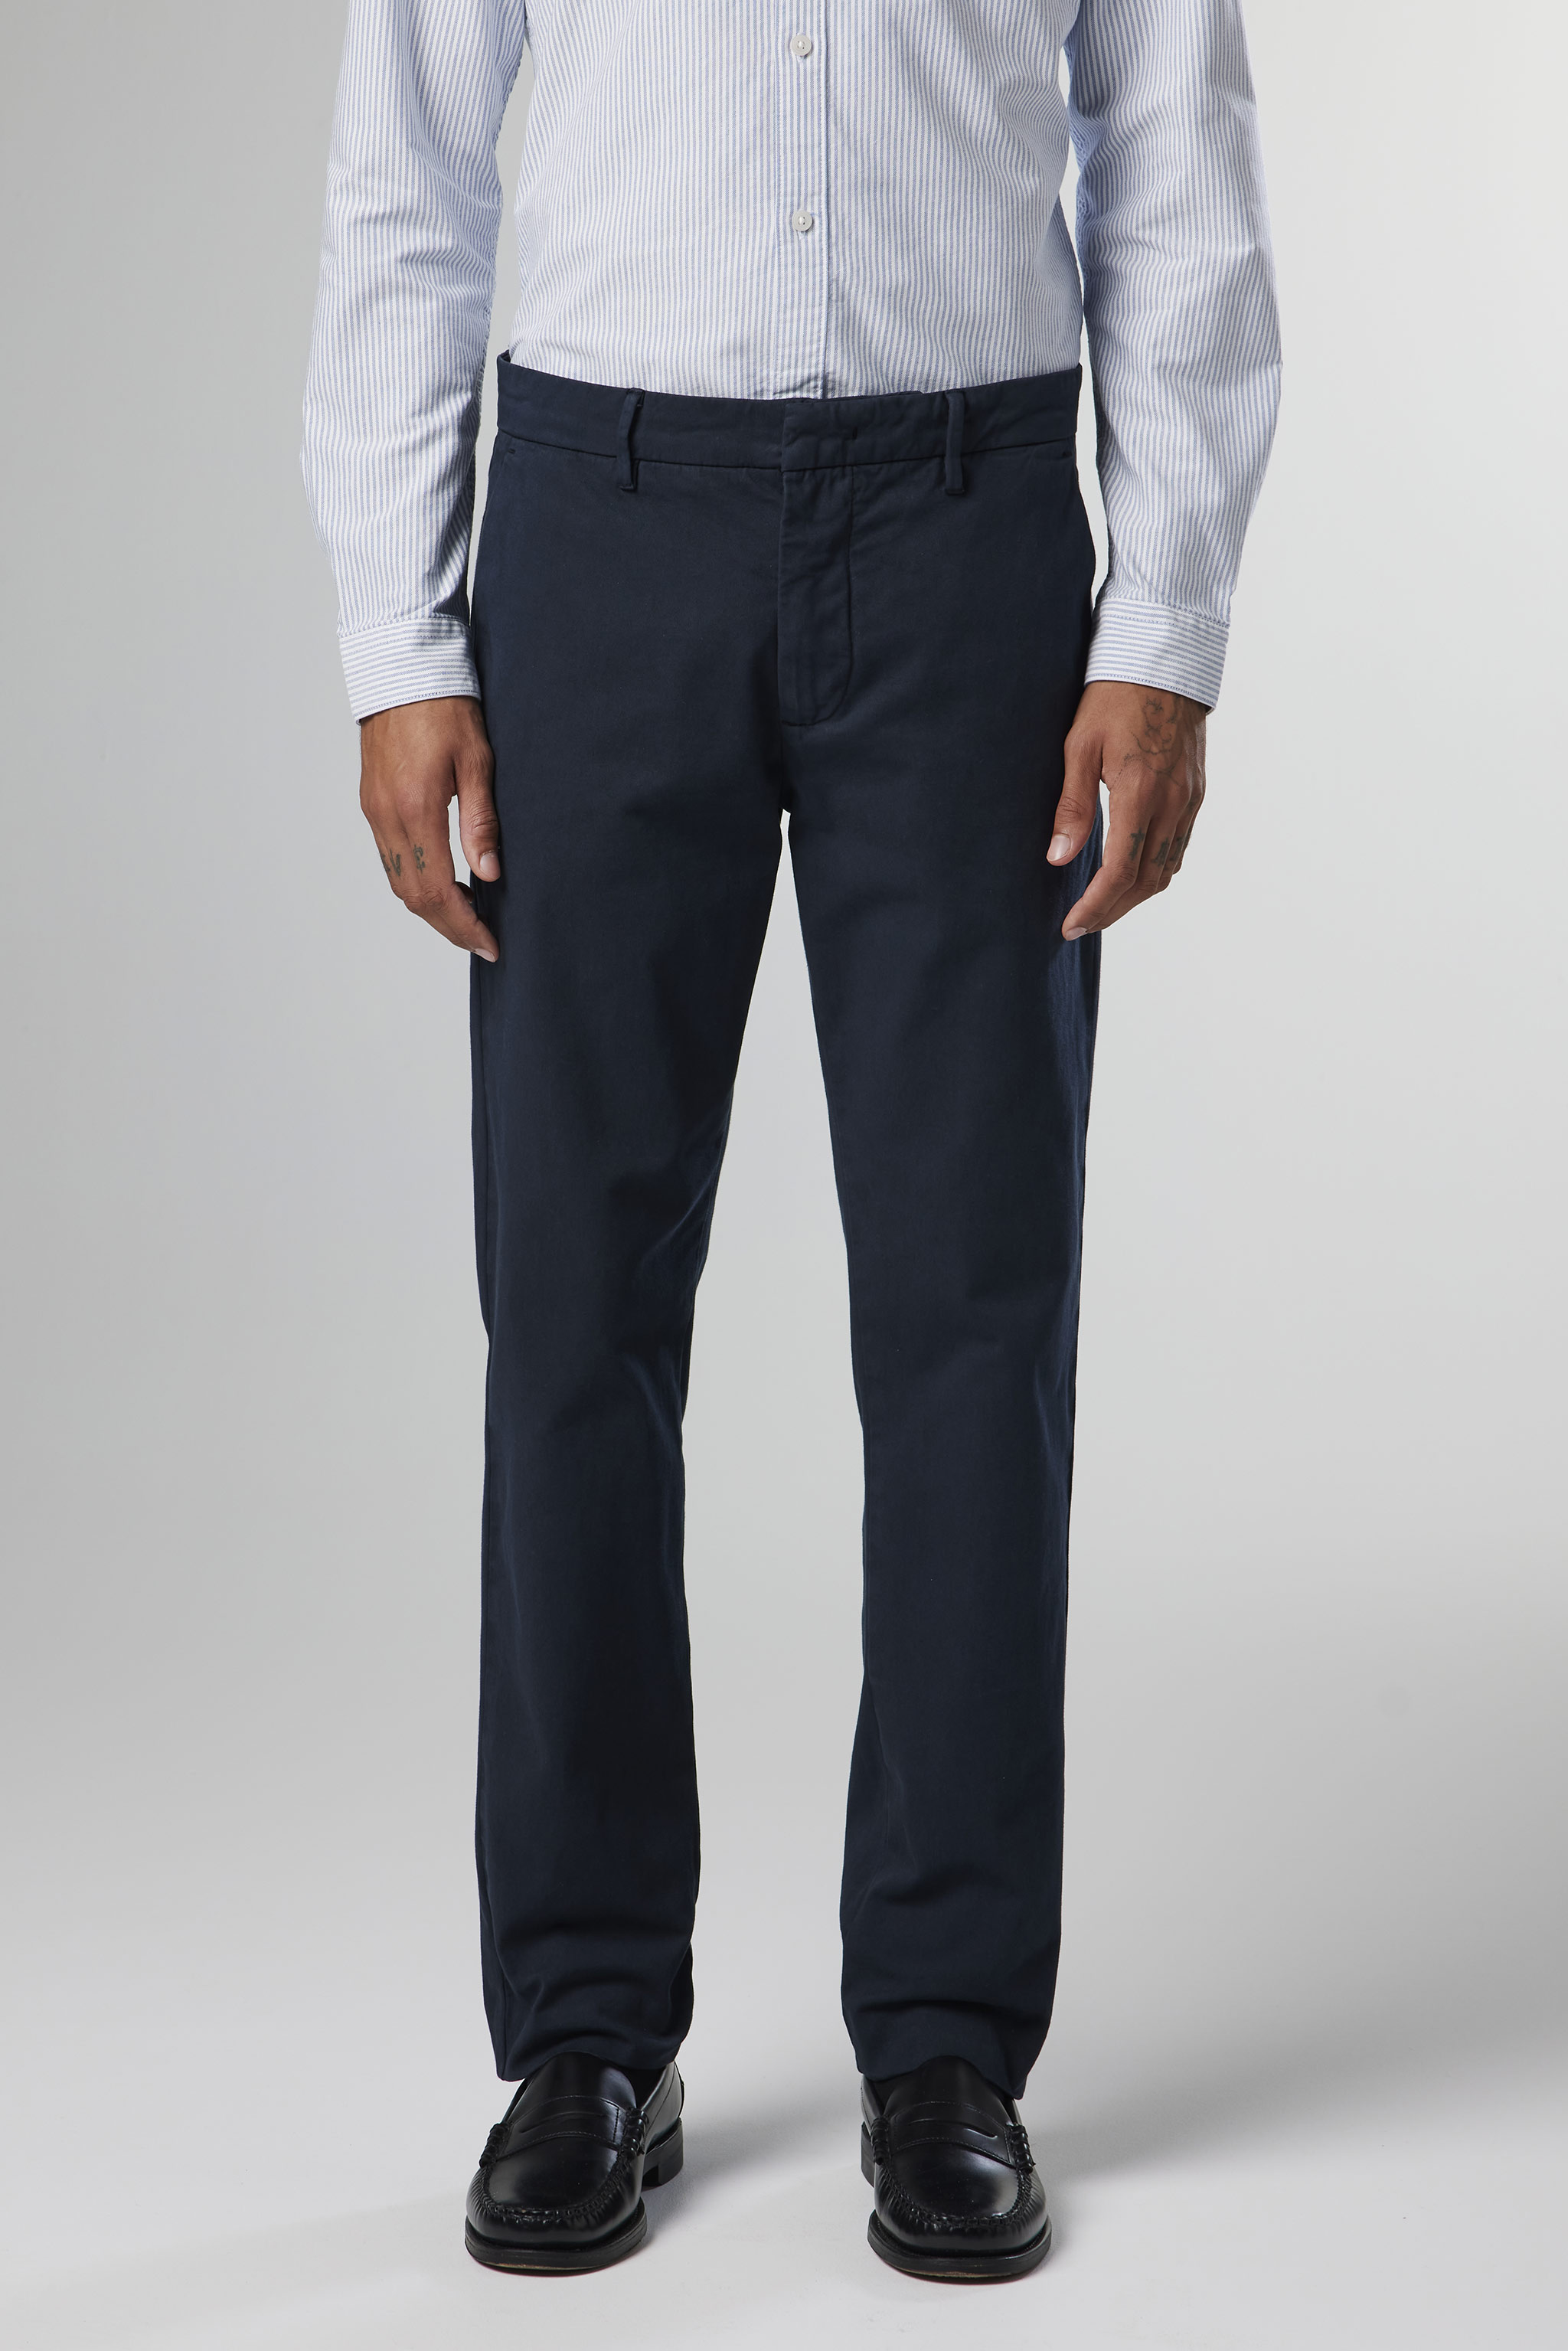 Theo 1202 men's chinos - Blue - Buy online at NN.07®